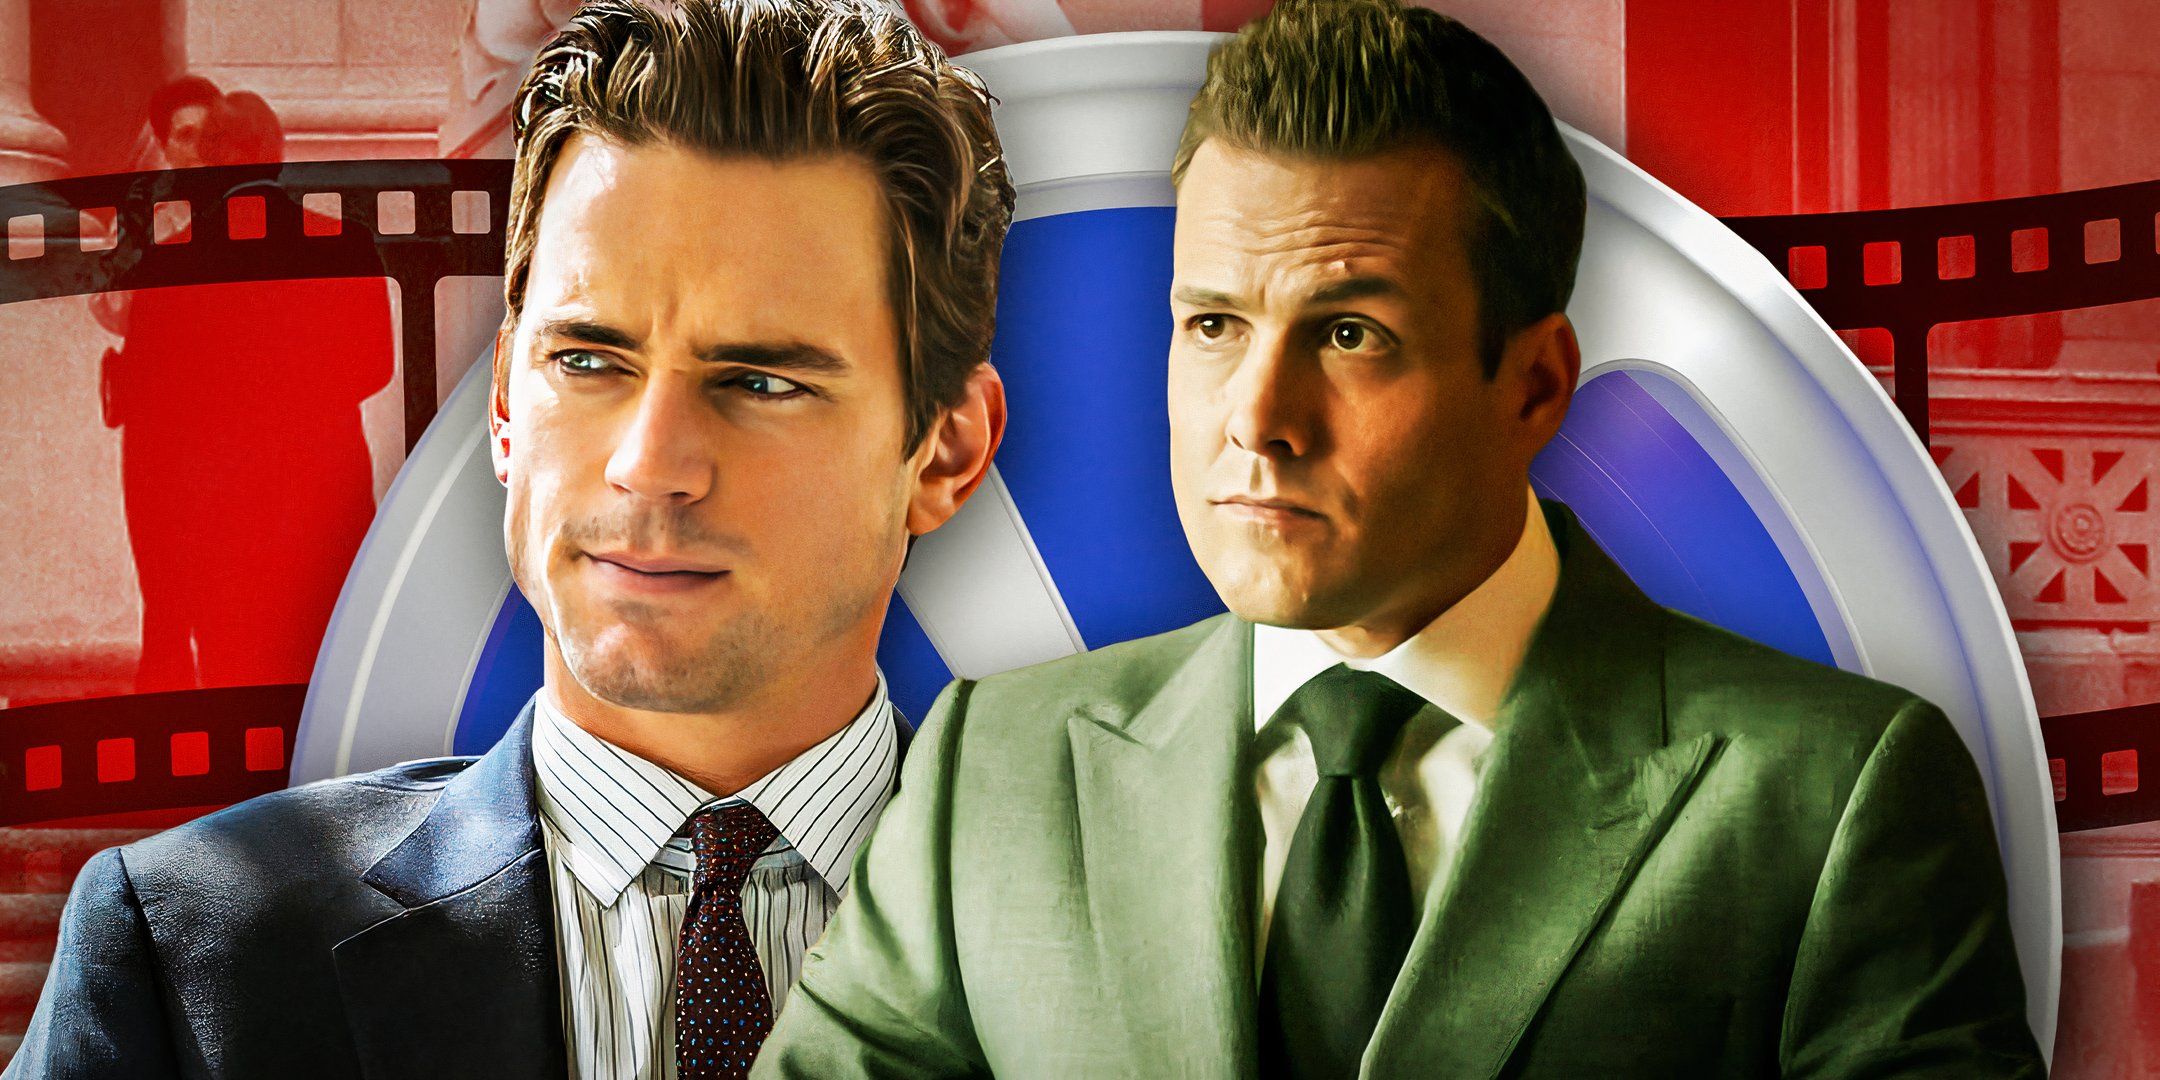 (Gabriel Macht as Harvey Specter) from Suits and (Matt Bomer as Neal Caffrey) from White Collar